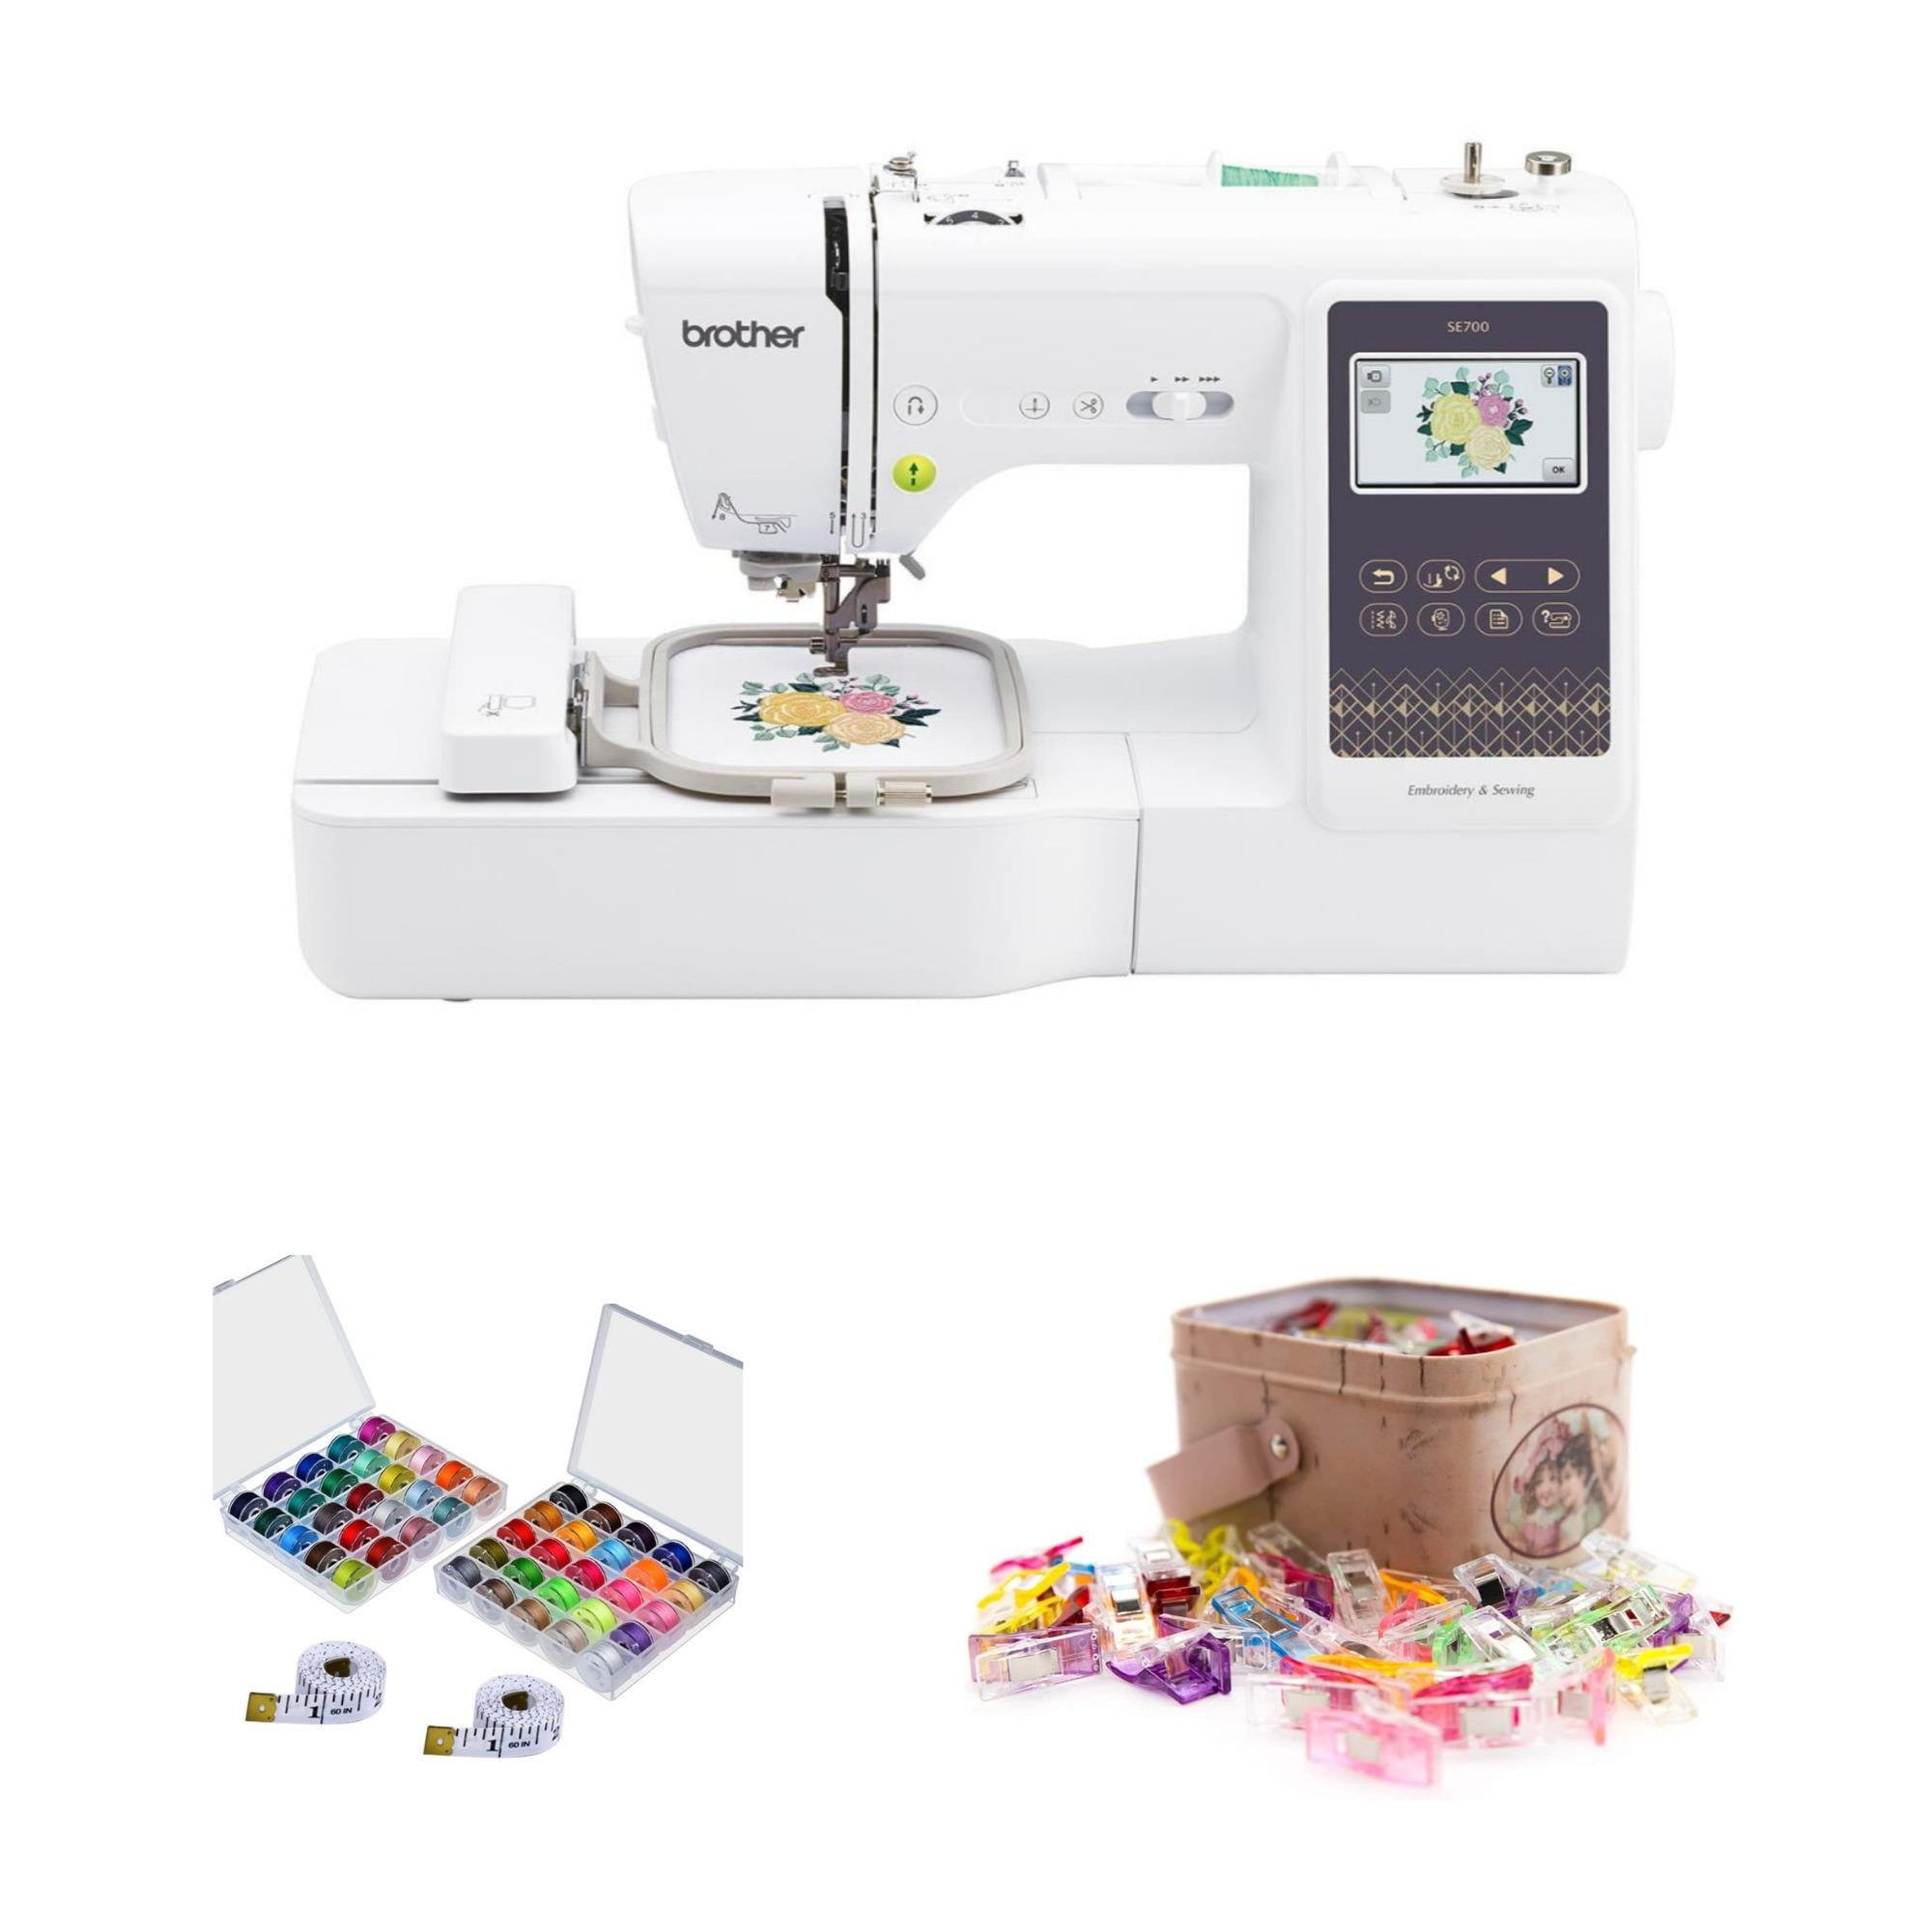 Brother SE700 Computerized Sewing and Embroidery Machine - White  12502670476